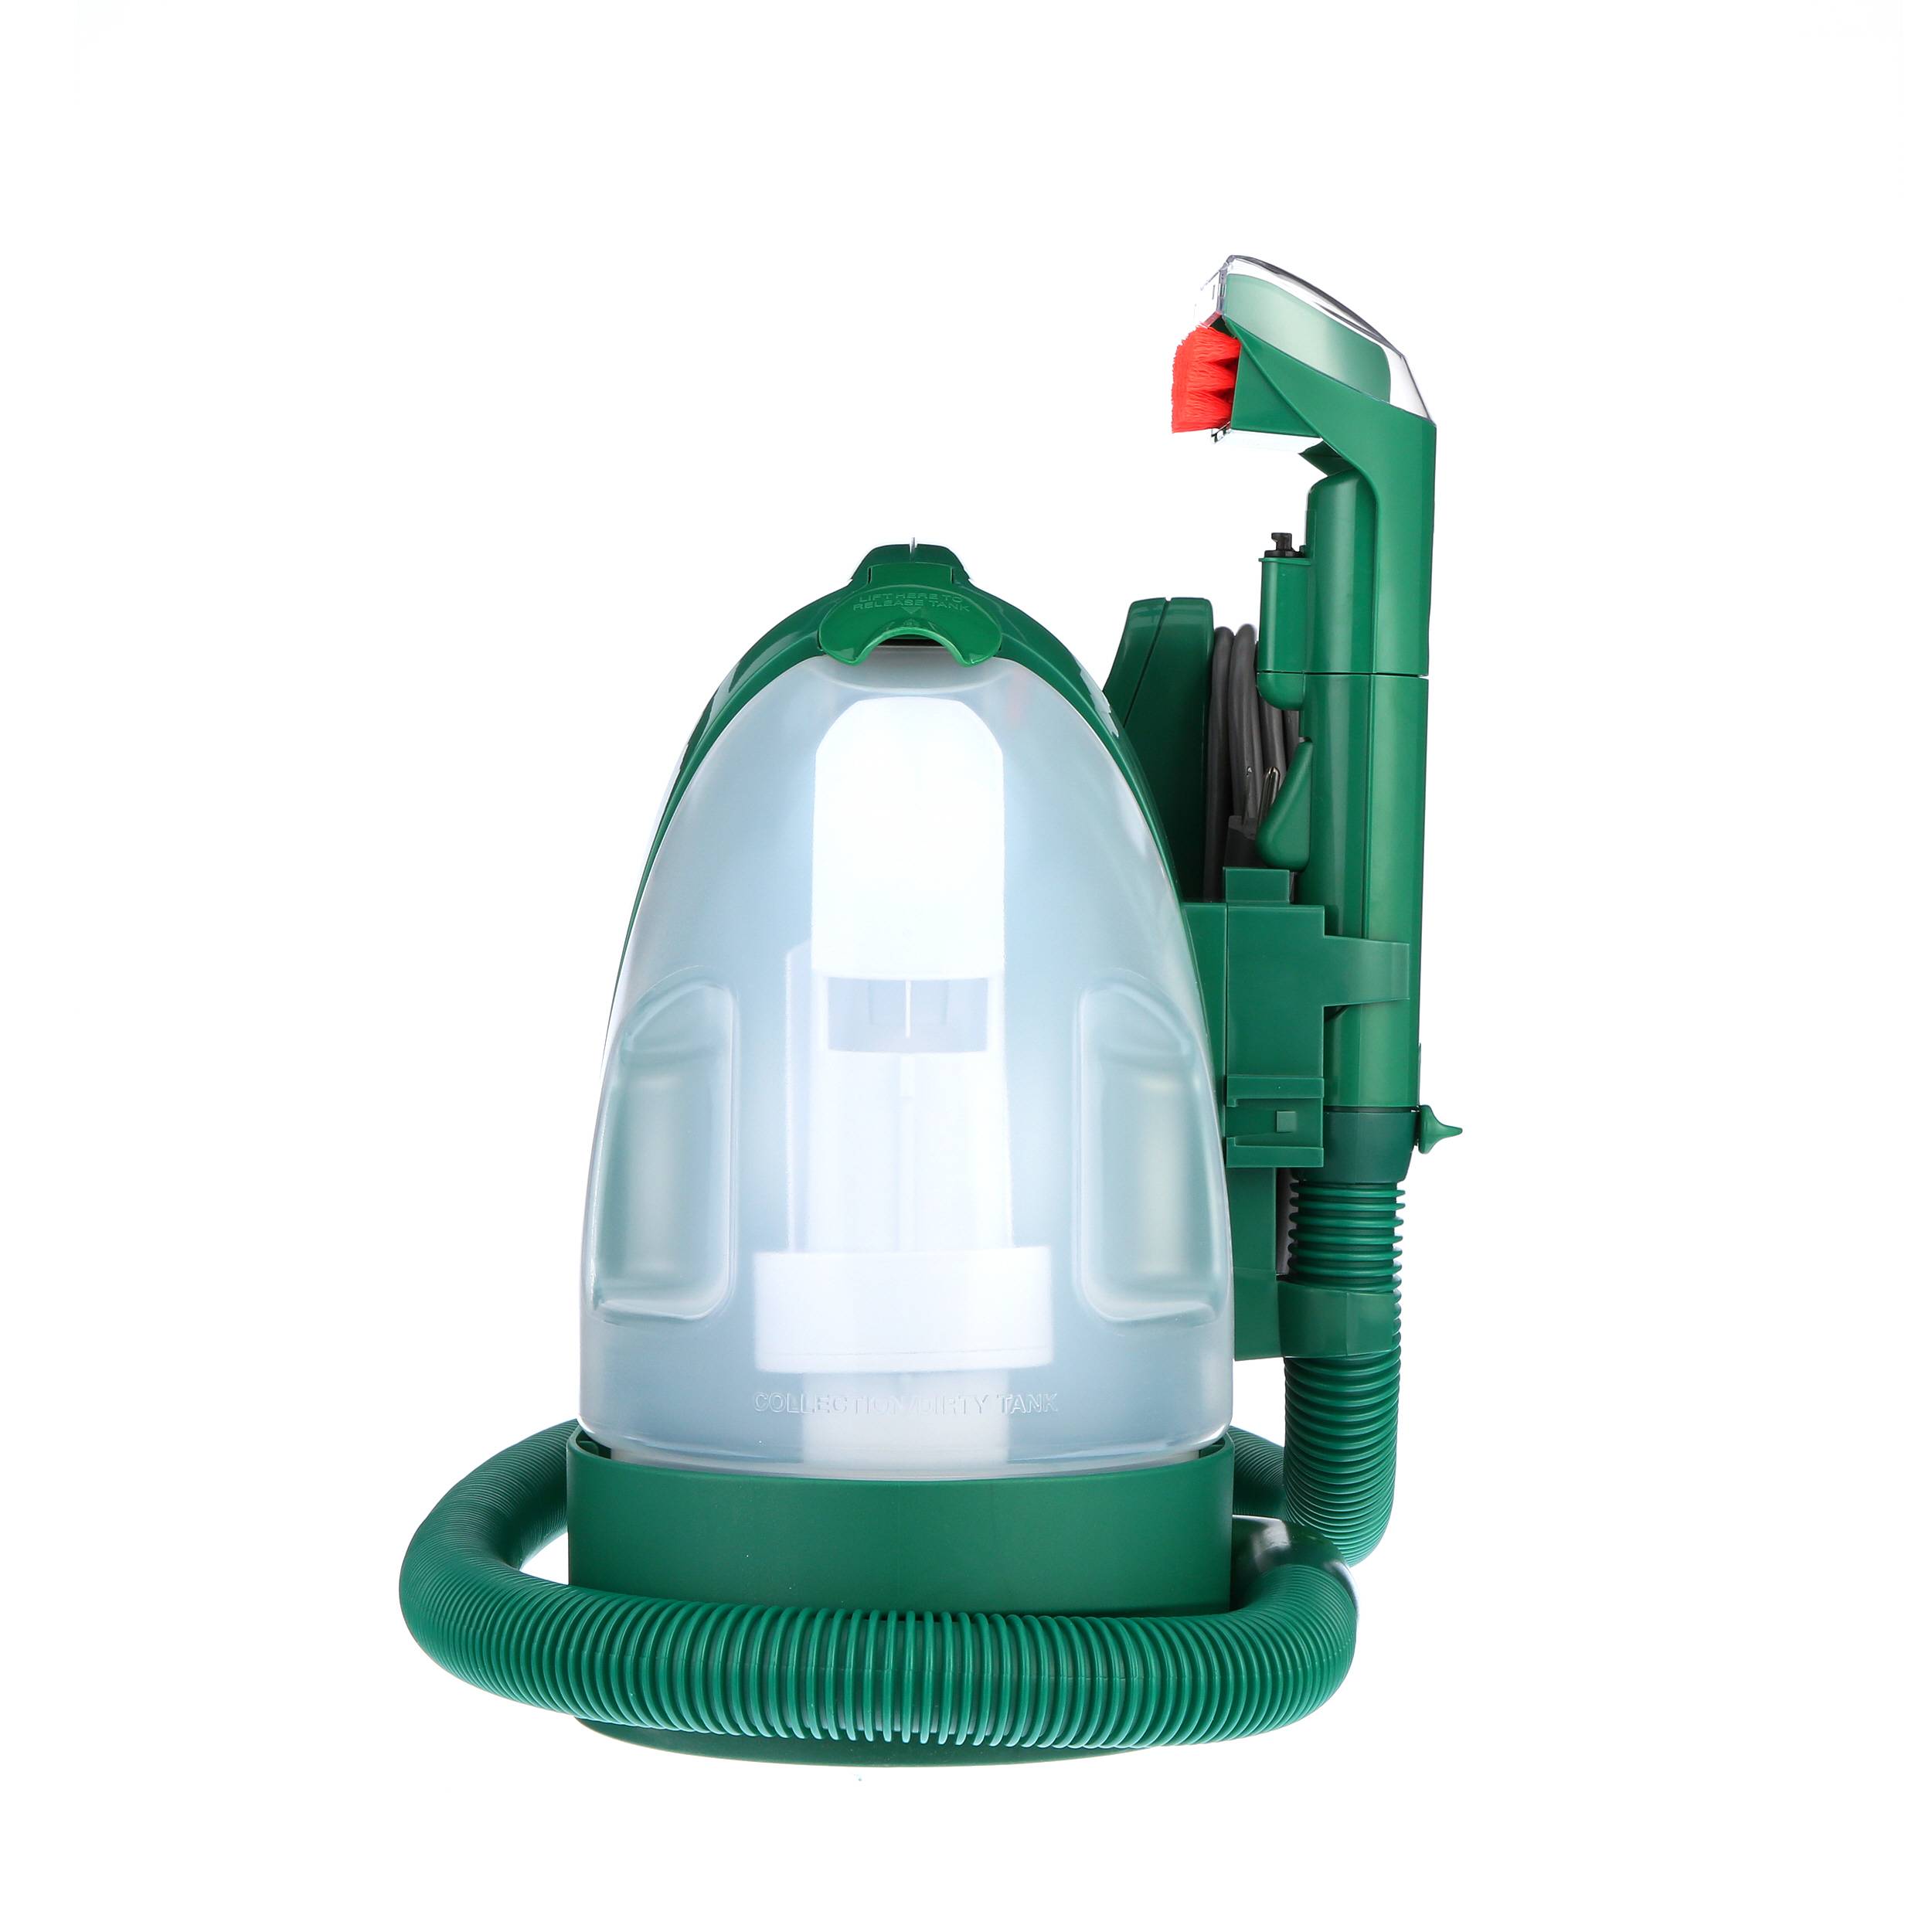 Bissell Little Green Spot and Stain Cleaning Machine, 1400M by